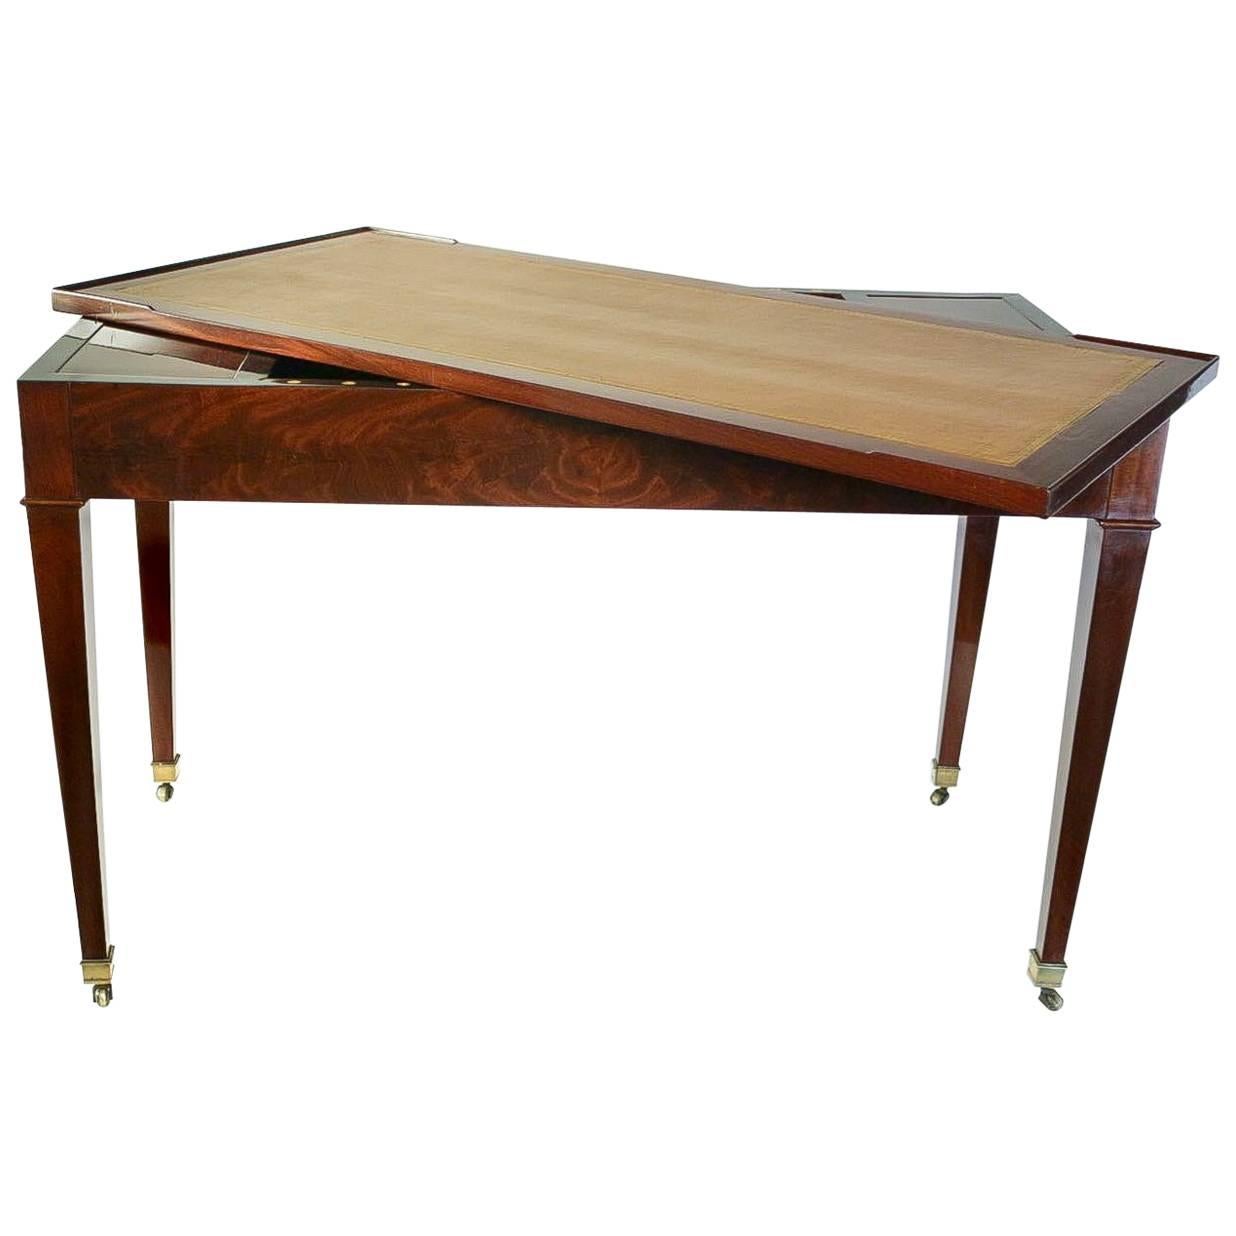 Jacob Freres Rue Meslée French Directoire Period Reversible Desk and Tric-Trac